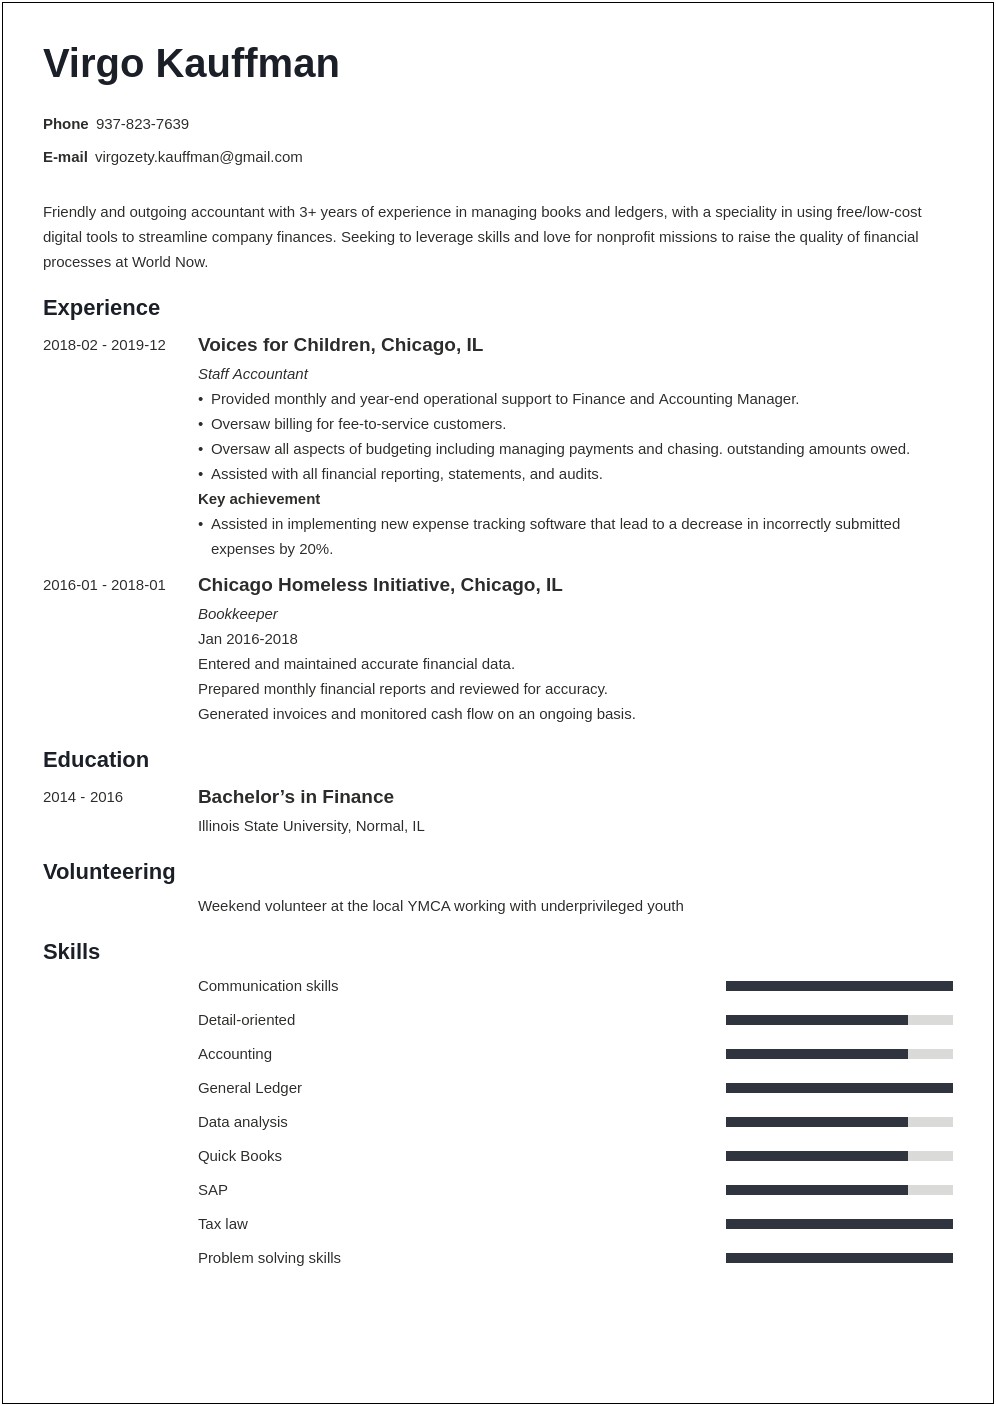 Objective Statement For Resume For Not Profit Job